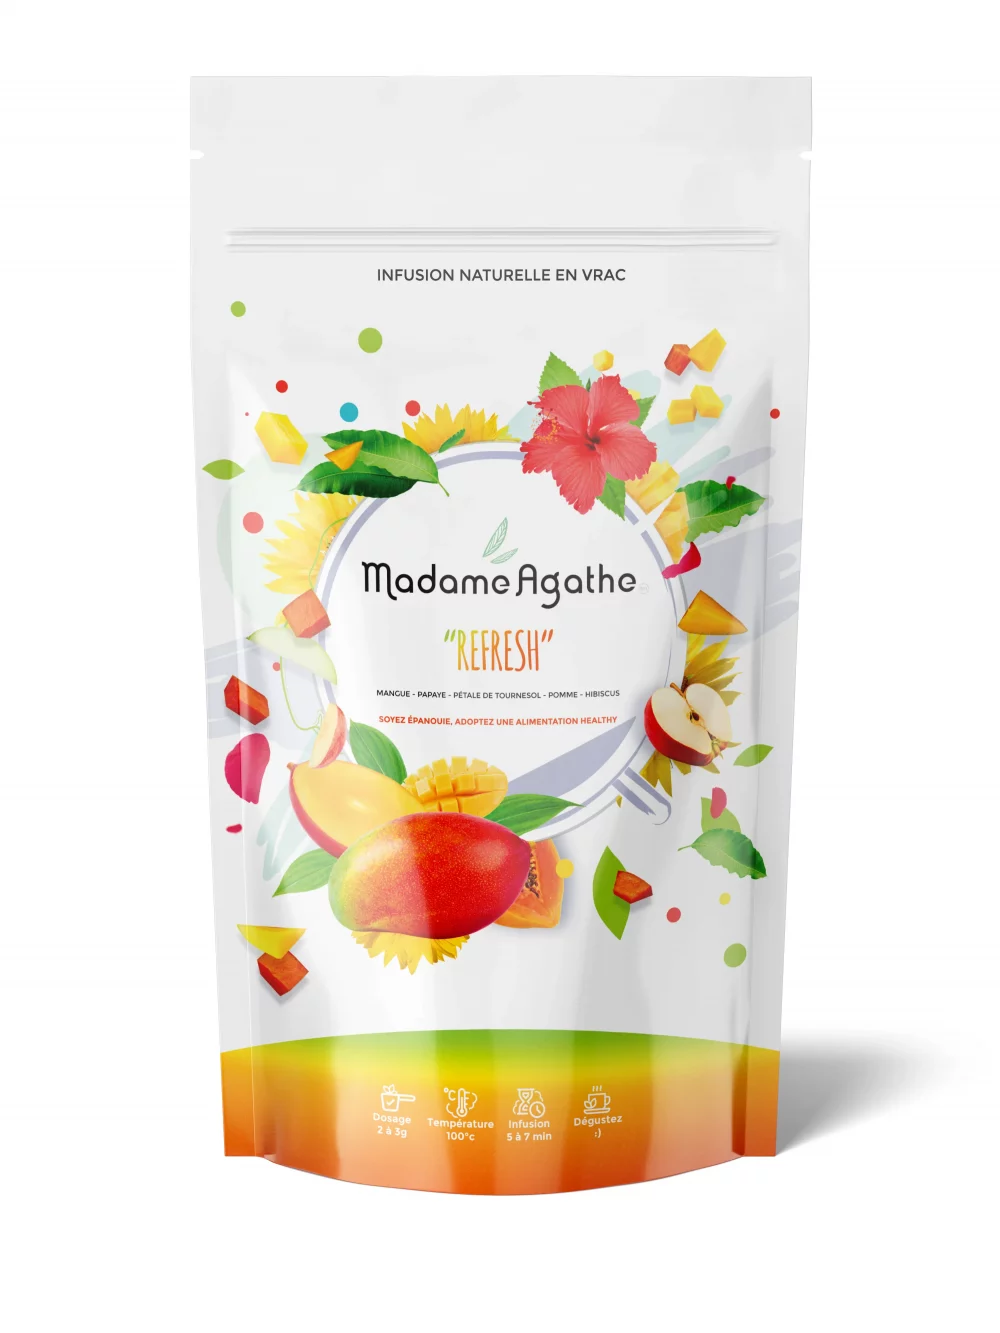 Infusion Refresh thé froid mangue